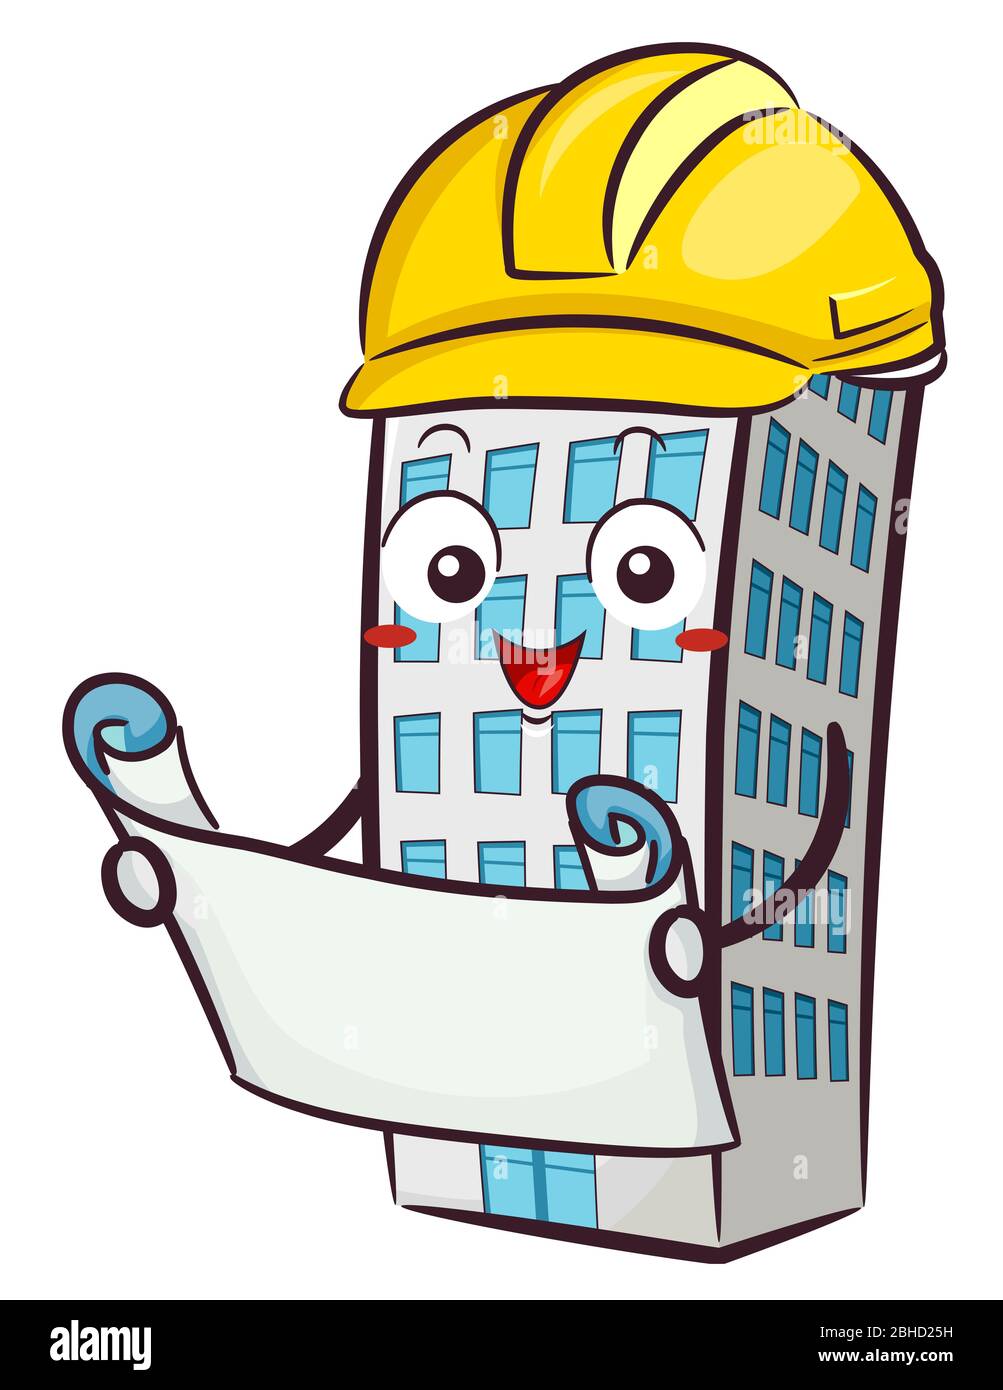 Illustration of a Building Mascot Wearing Yellow Hard Hat and Looking at Blueprint Stock Photo